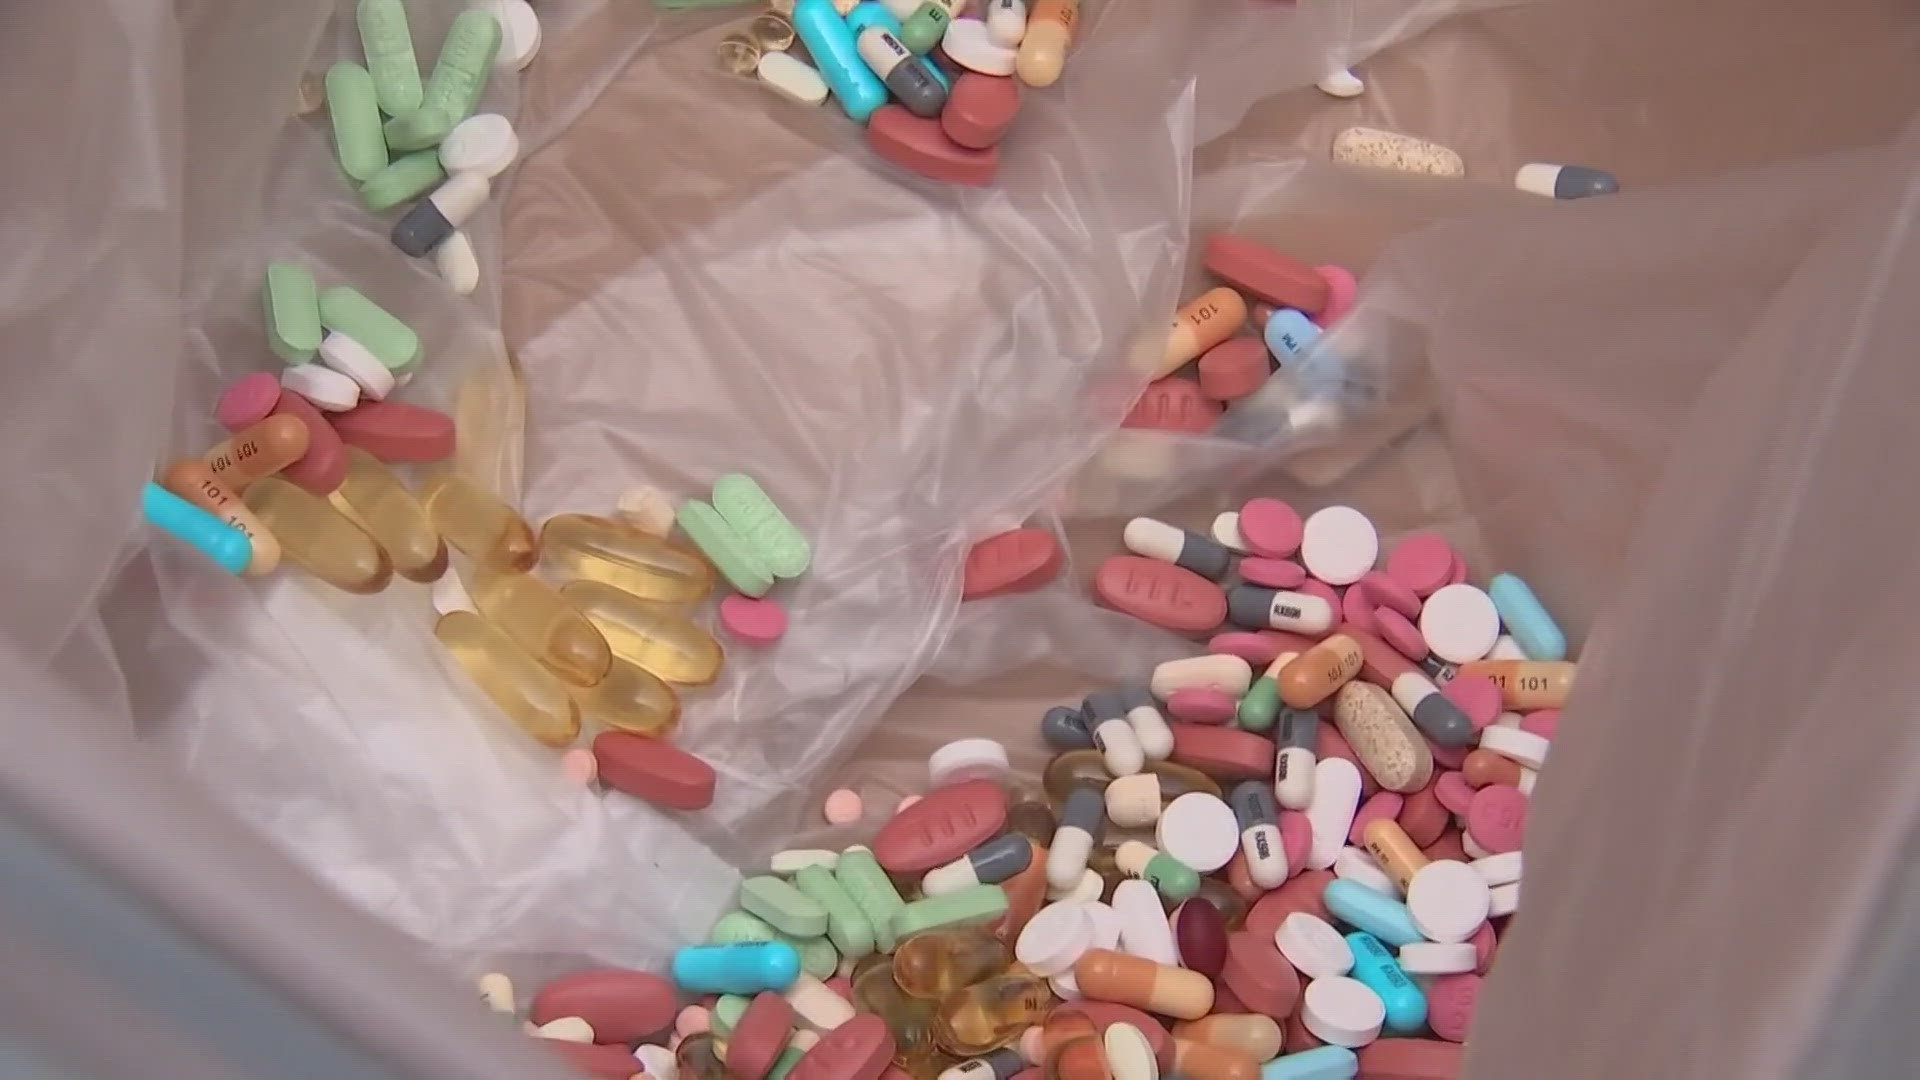 Many cities and law enforcement offices will host Drug-Take Back Day events this Saturday.